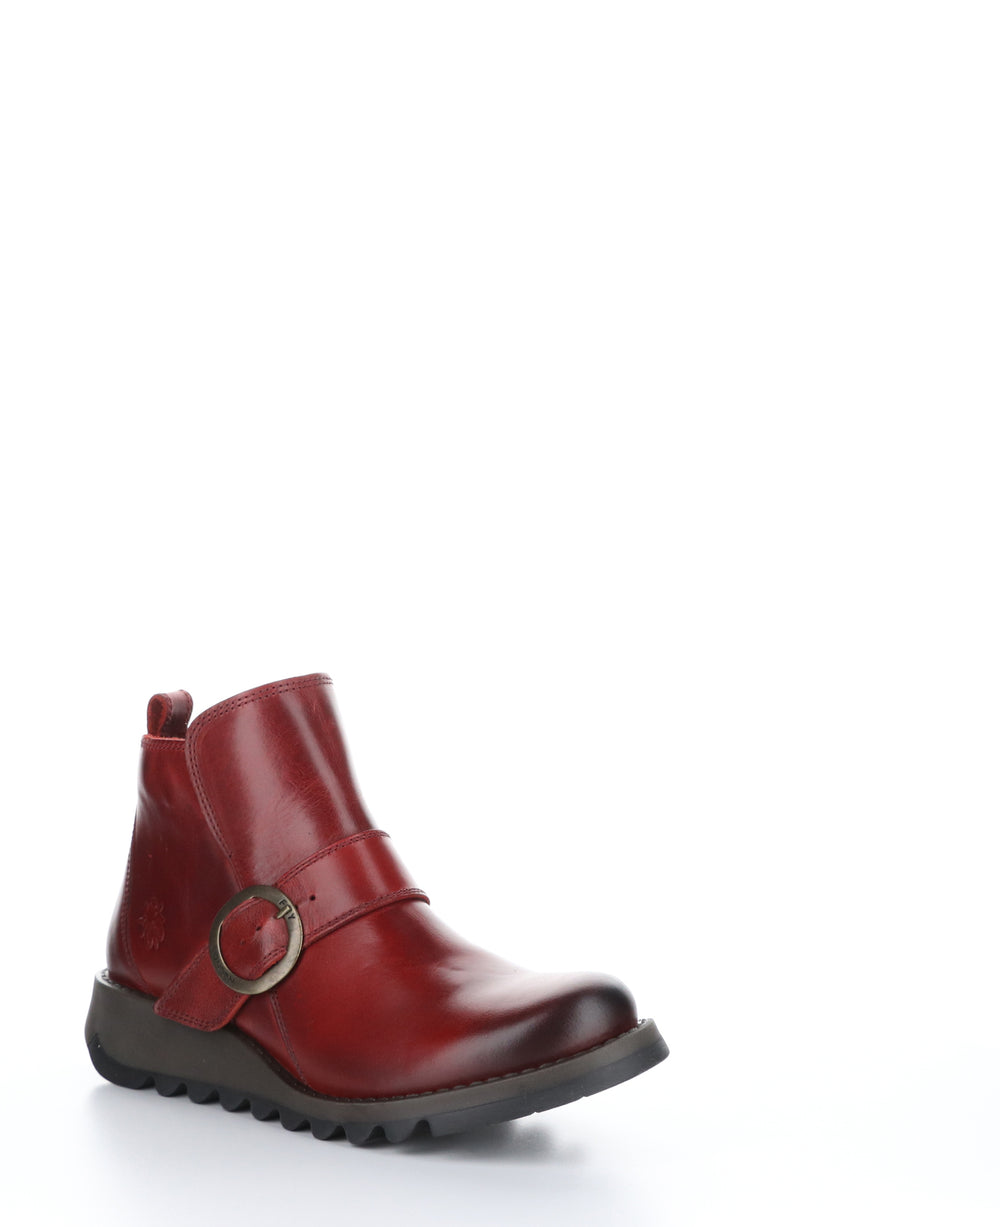 SIAS812FLY Red Zip Up Ankle Boots|SIAS812FLY Bottines avec Fermeture Zippée in Rouge